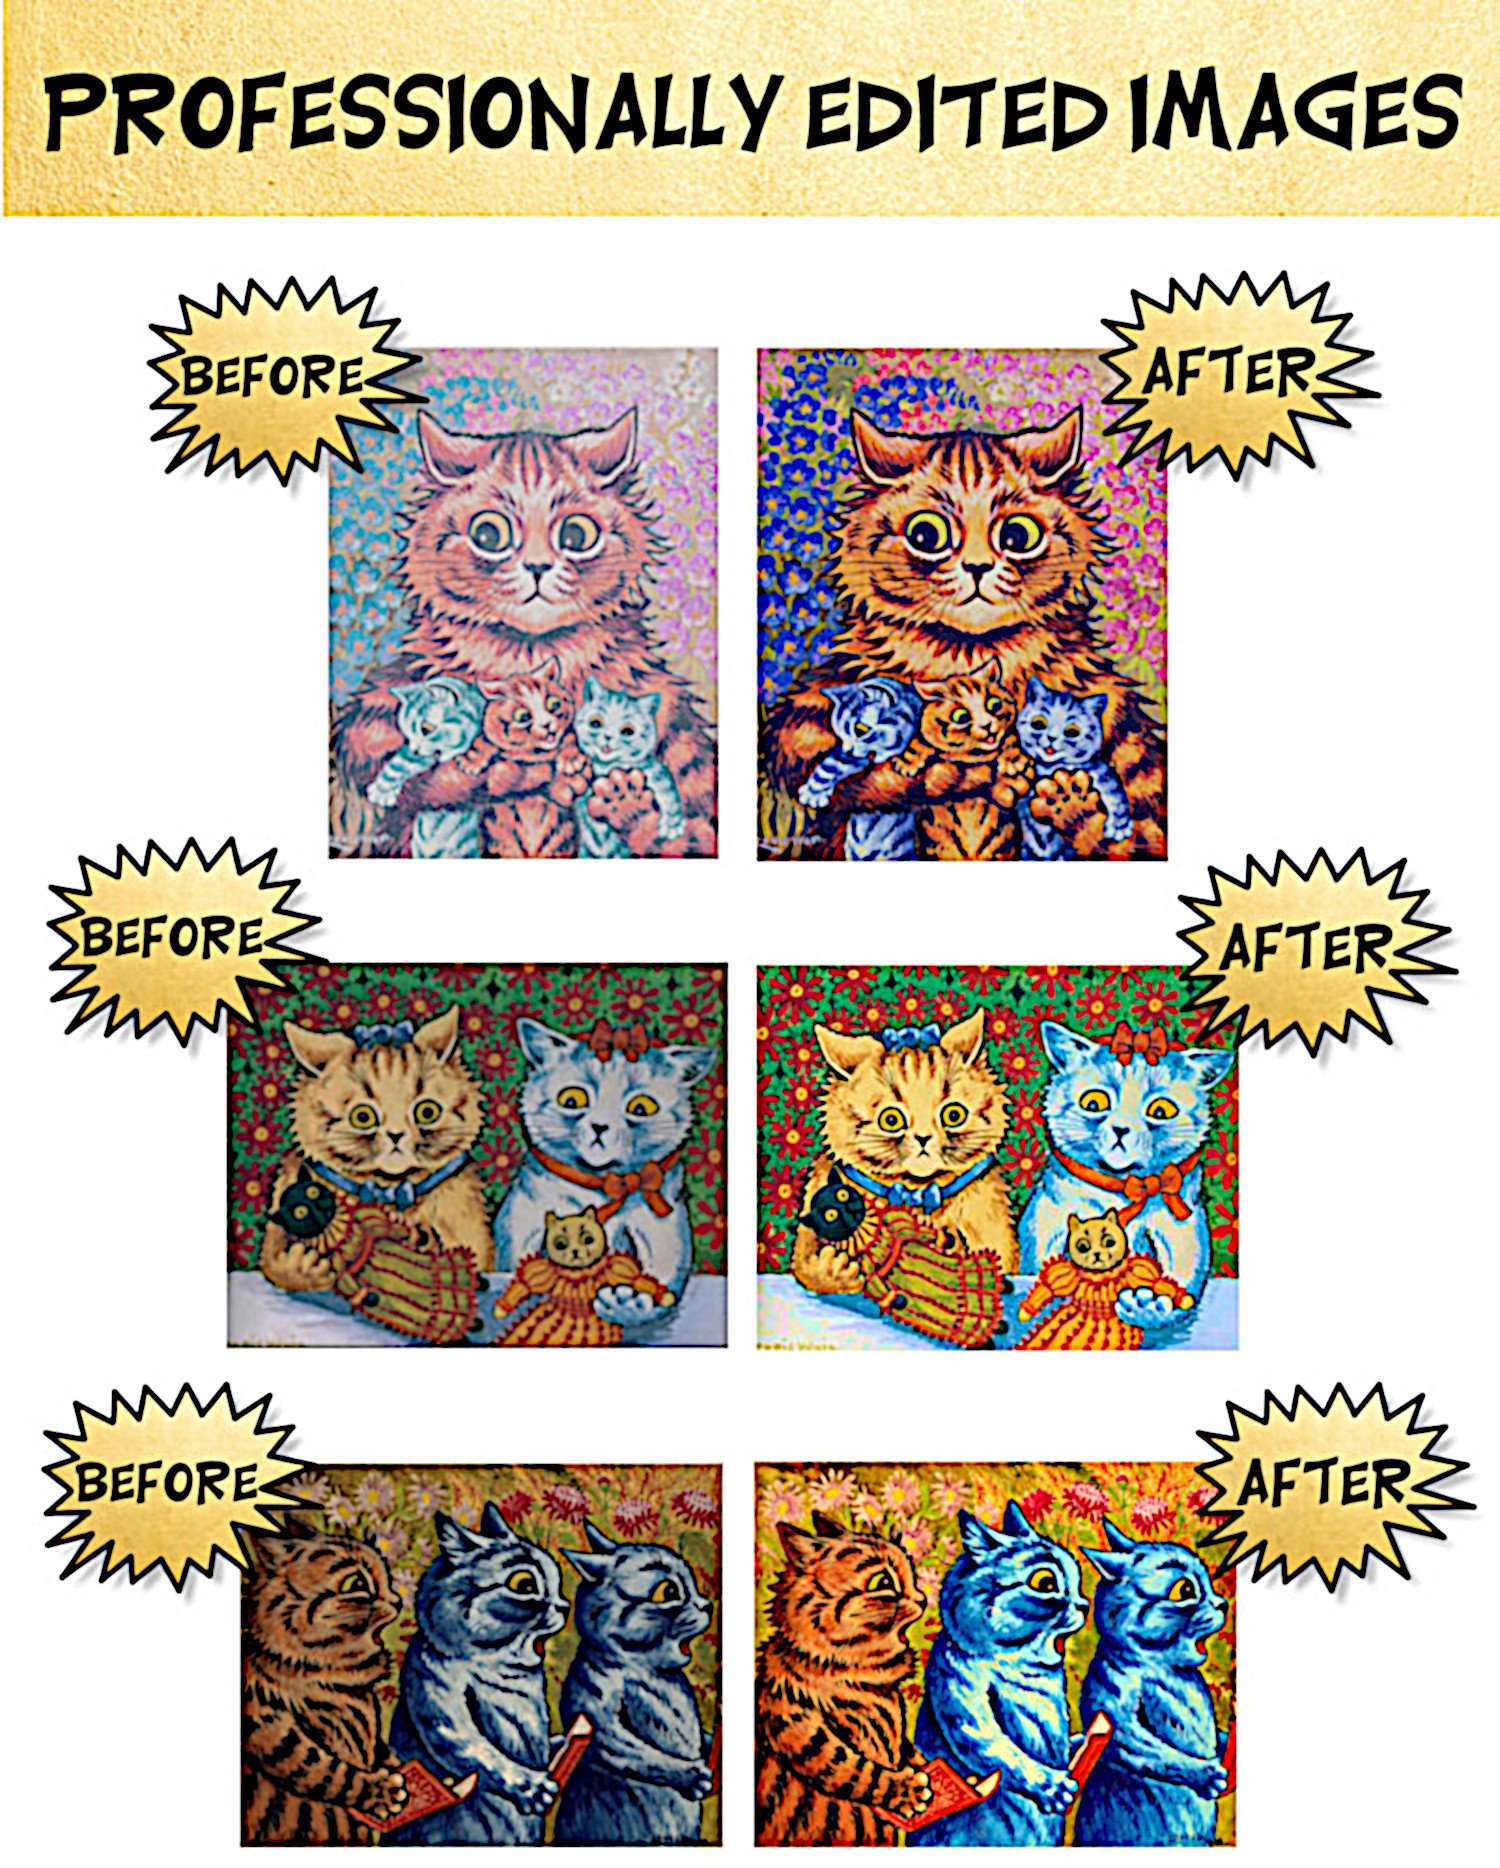 Mom With Three Cats Louis Wain Art Board Print for Sale by joycesparks28